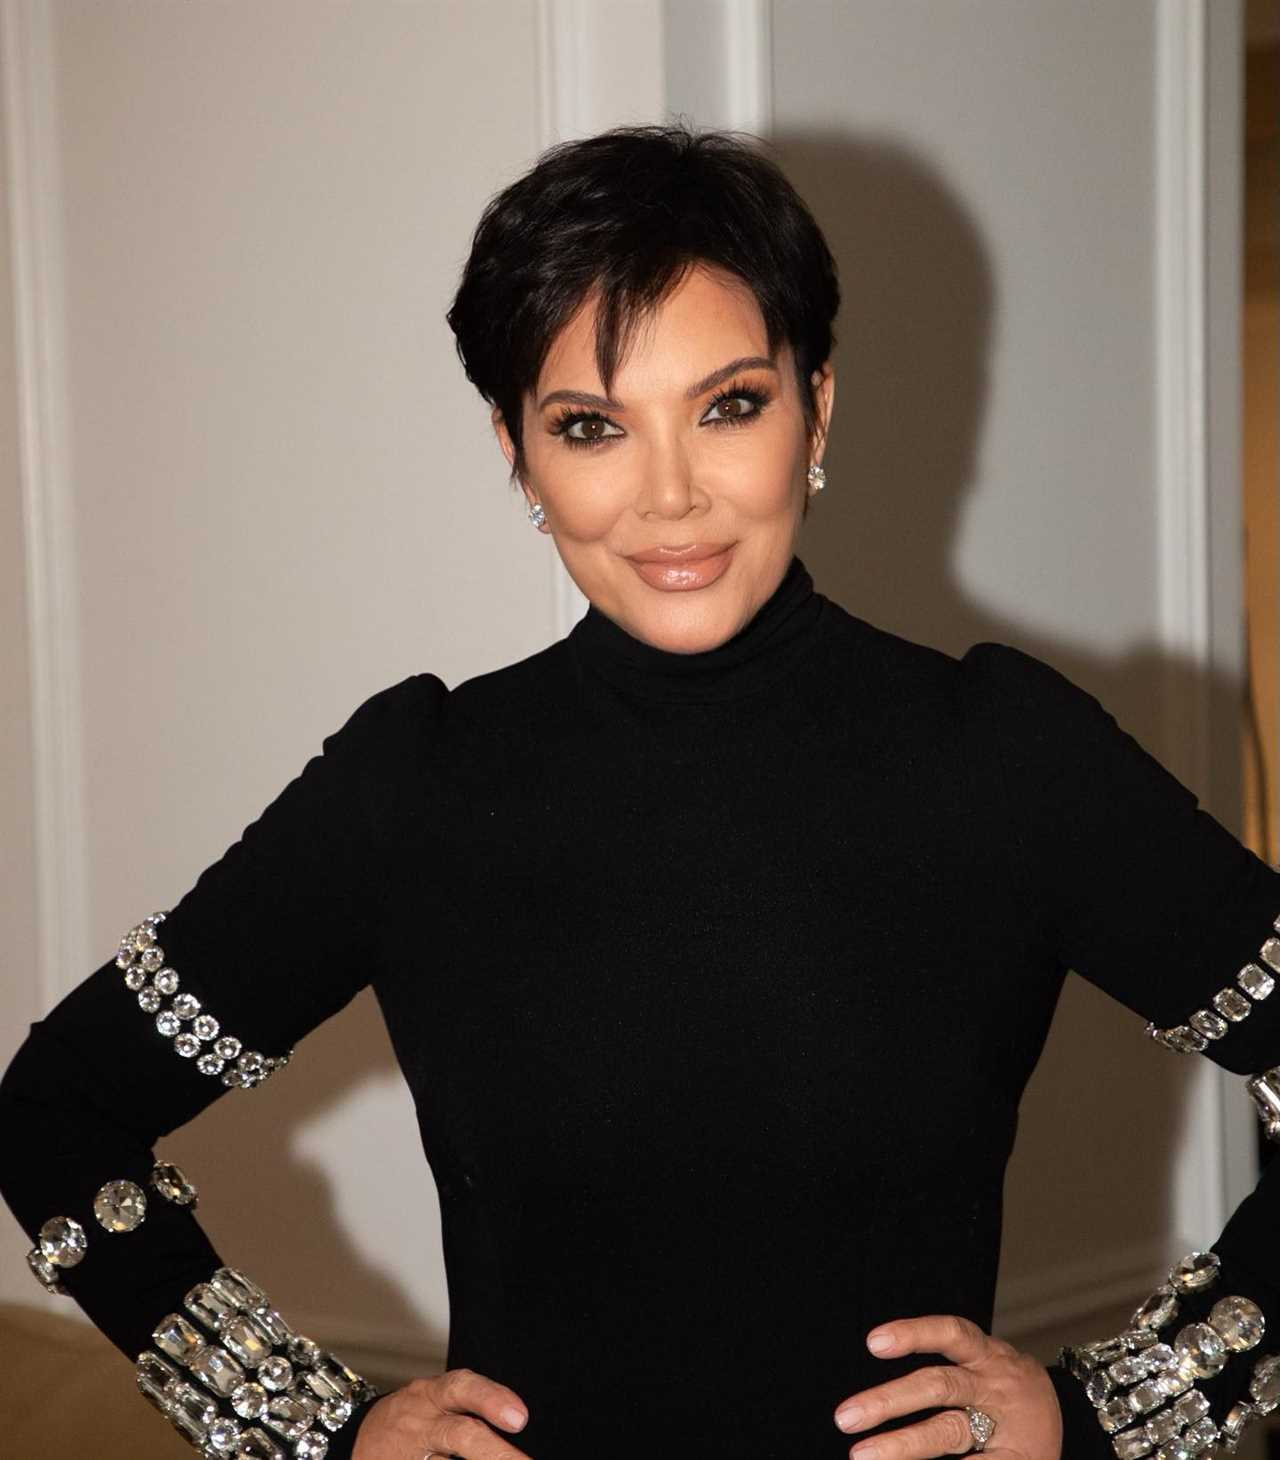 Kardashian fans left confused as Kris Jenner, 67, looks ‘unrecognizable’ in new close-up photo of her face in London